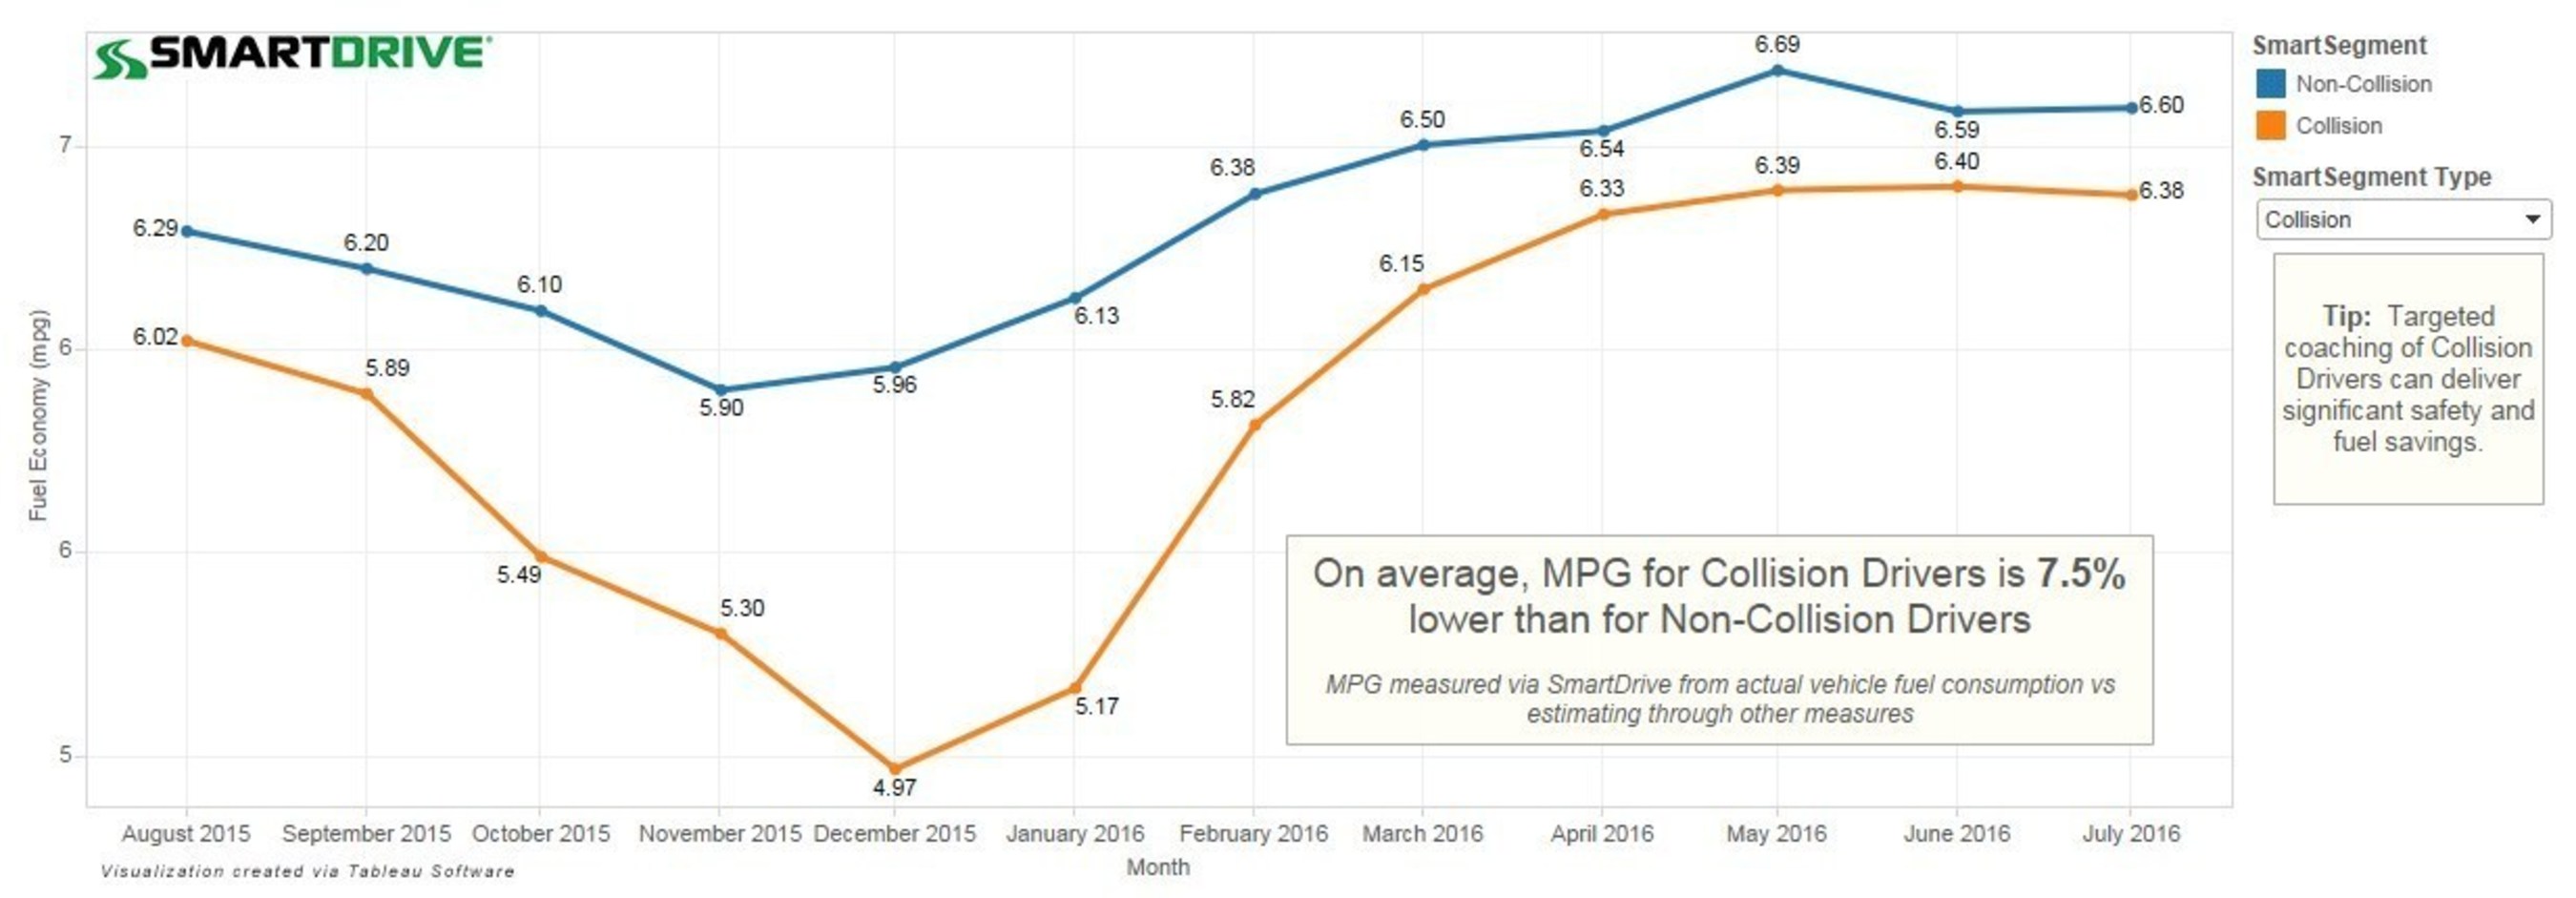 SmartDrive's SmartIQ Beat Collision Snapshot shows that, on average, MPG for collision drivers is 7.5 percent lower than for non-collision drivers.